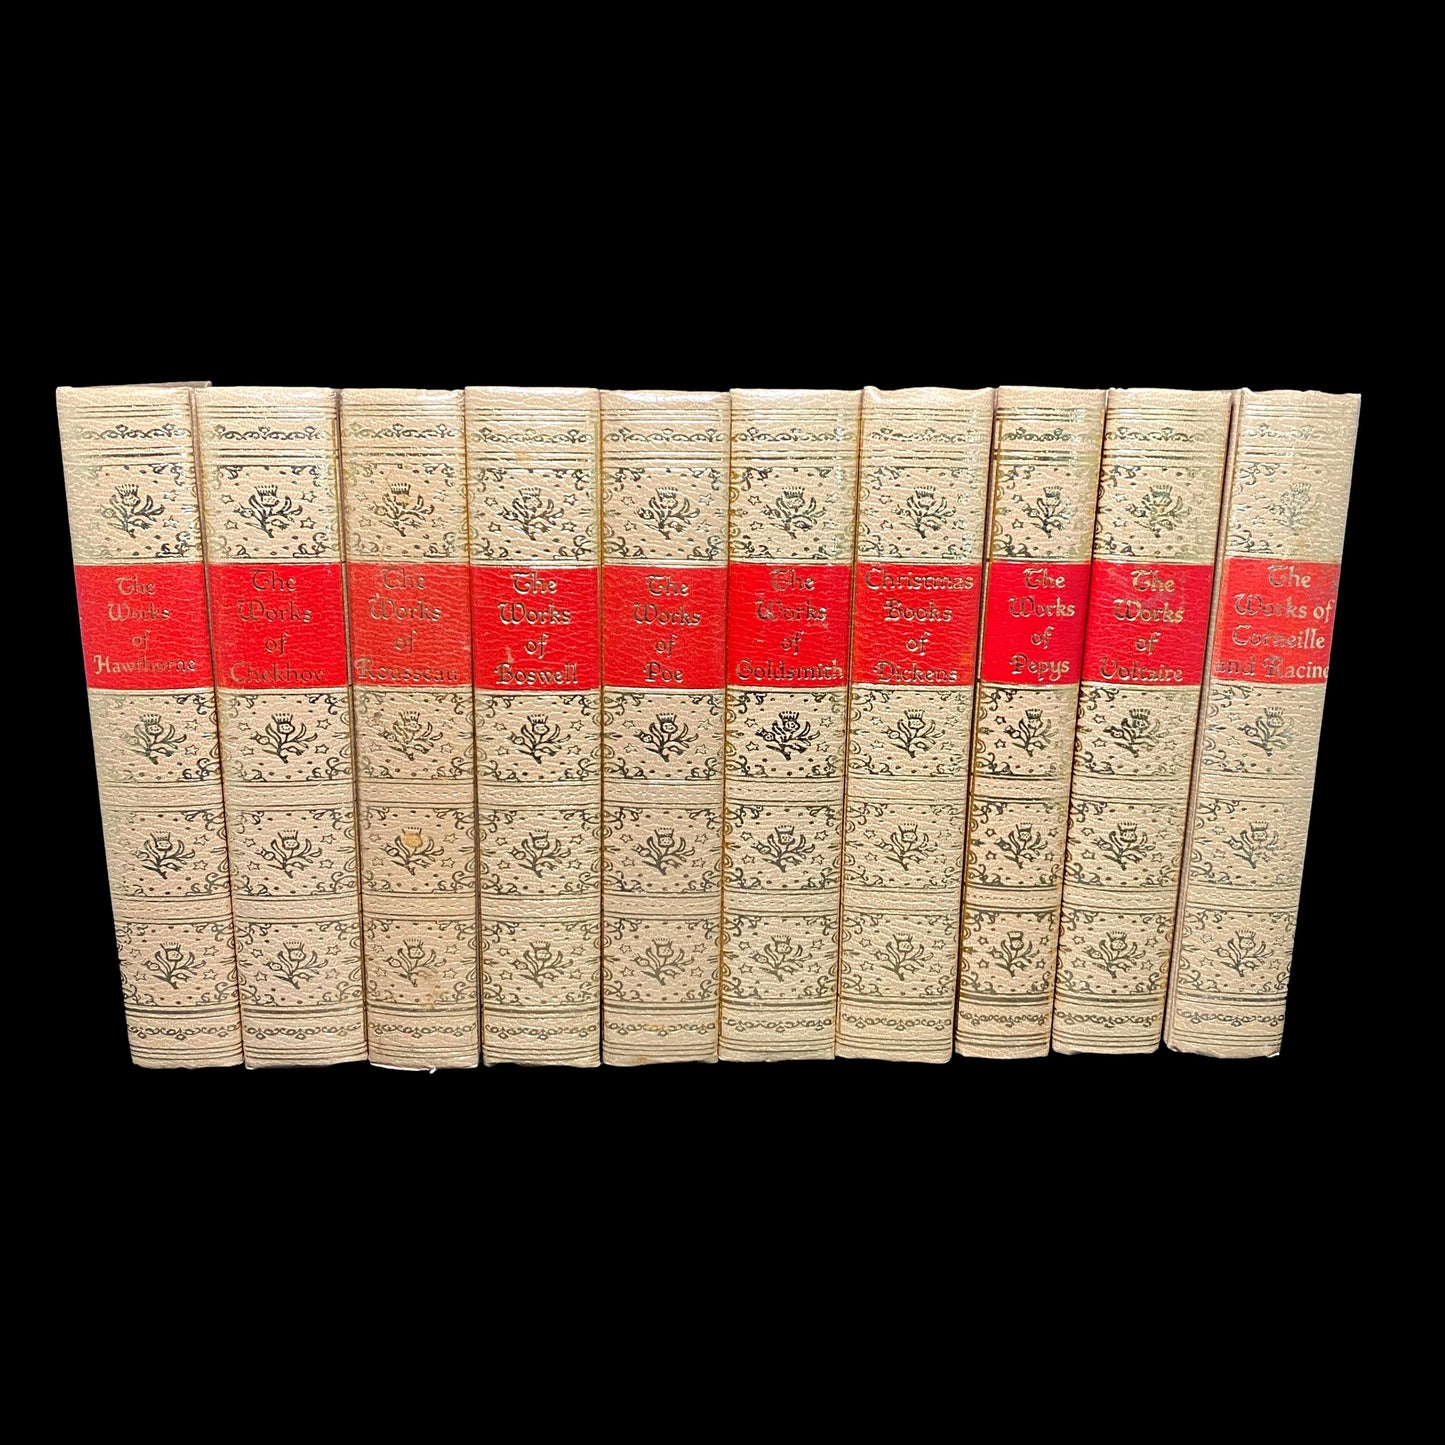 Black's Readers Service Classical Authors Collection, 57 Volumes